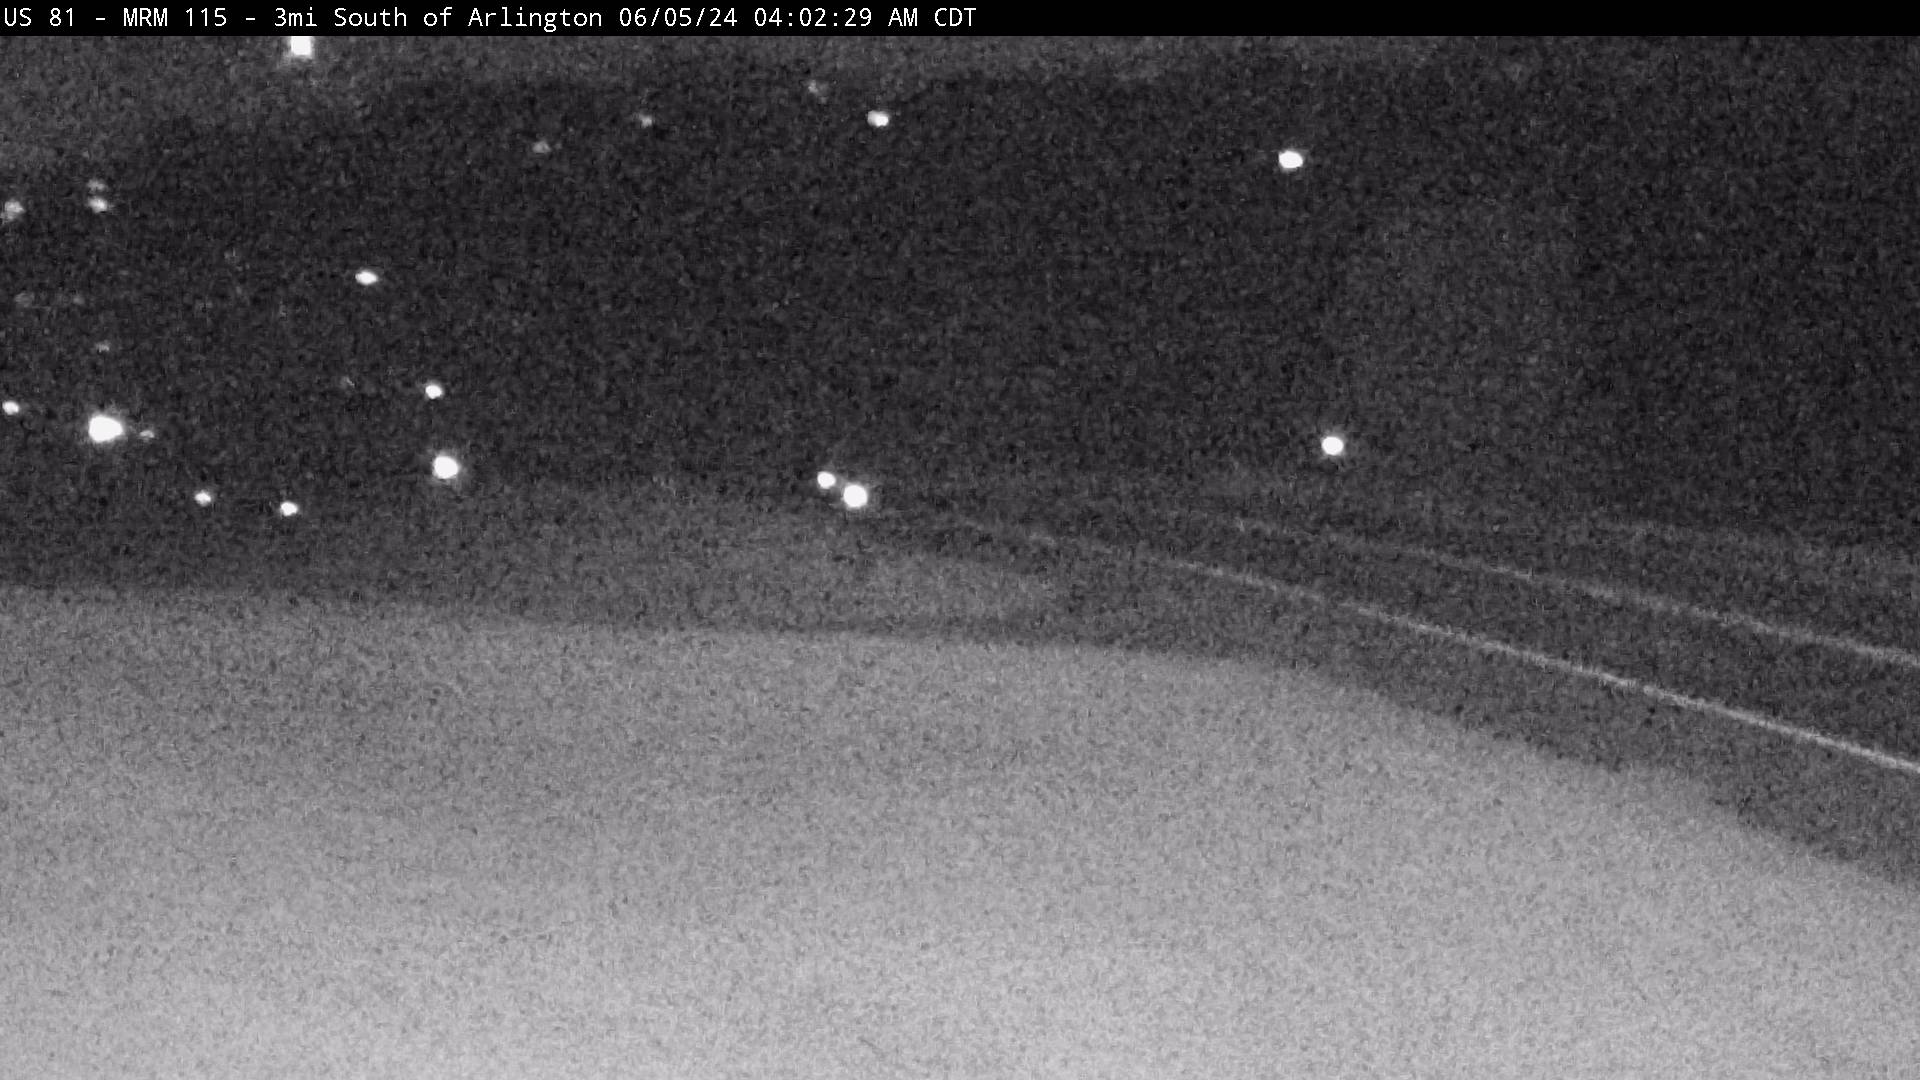 Traffic Cam 3 miles south of town along US-81 @ MP 115 - North Player